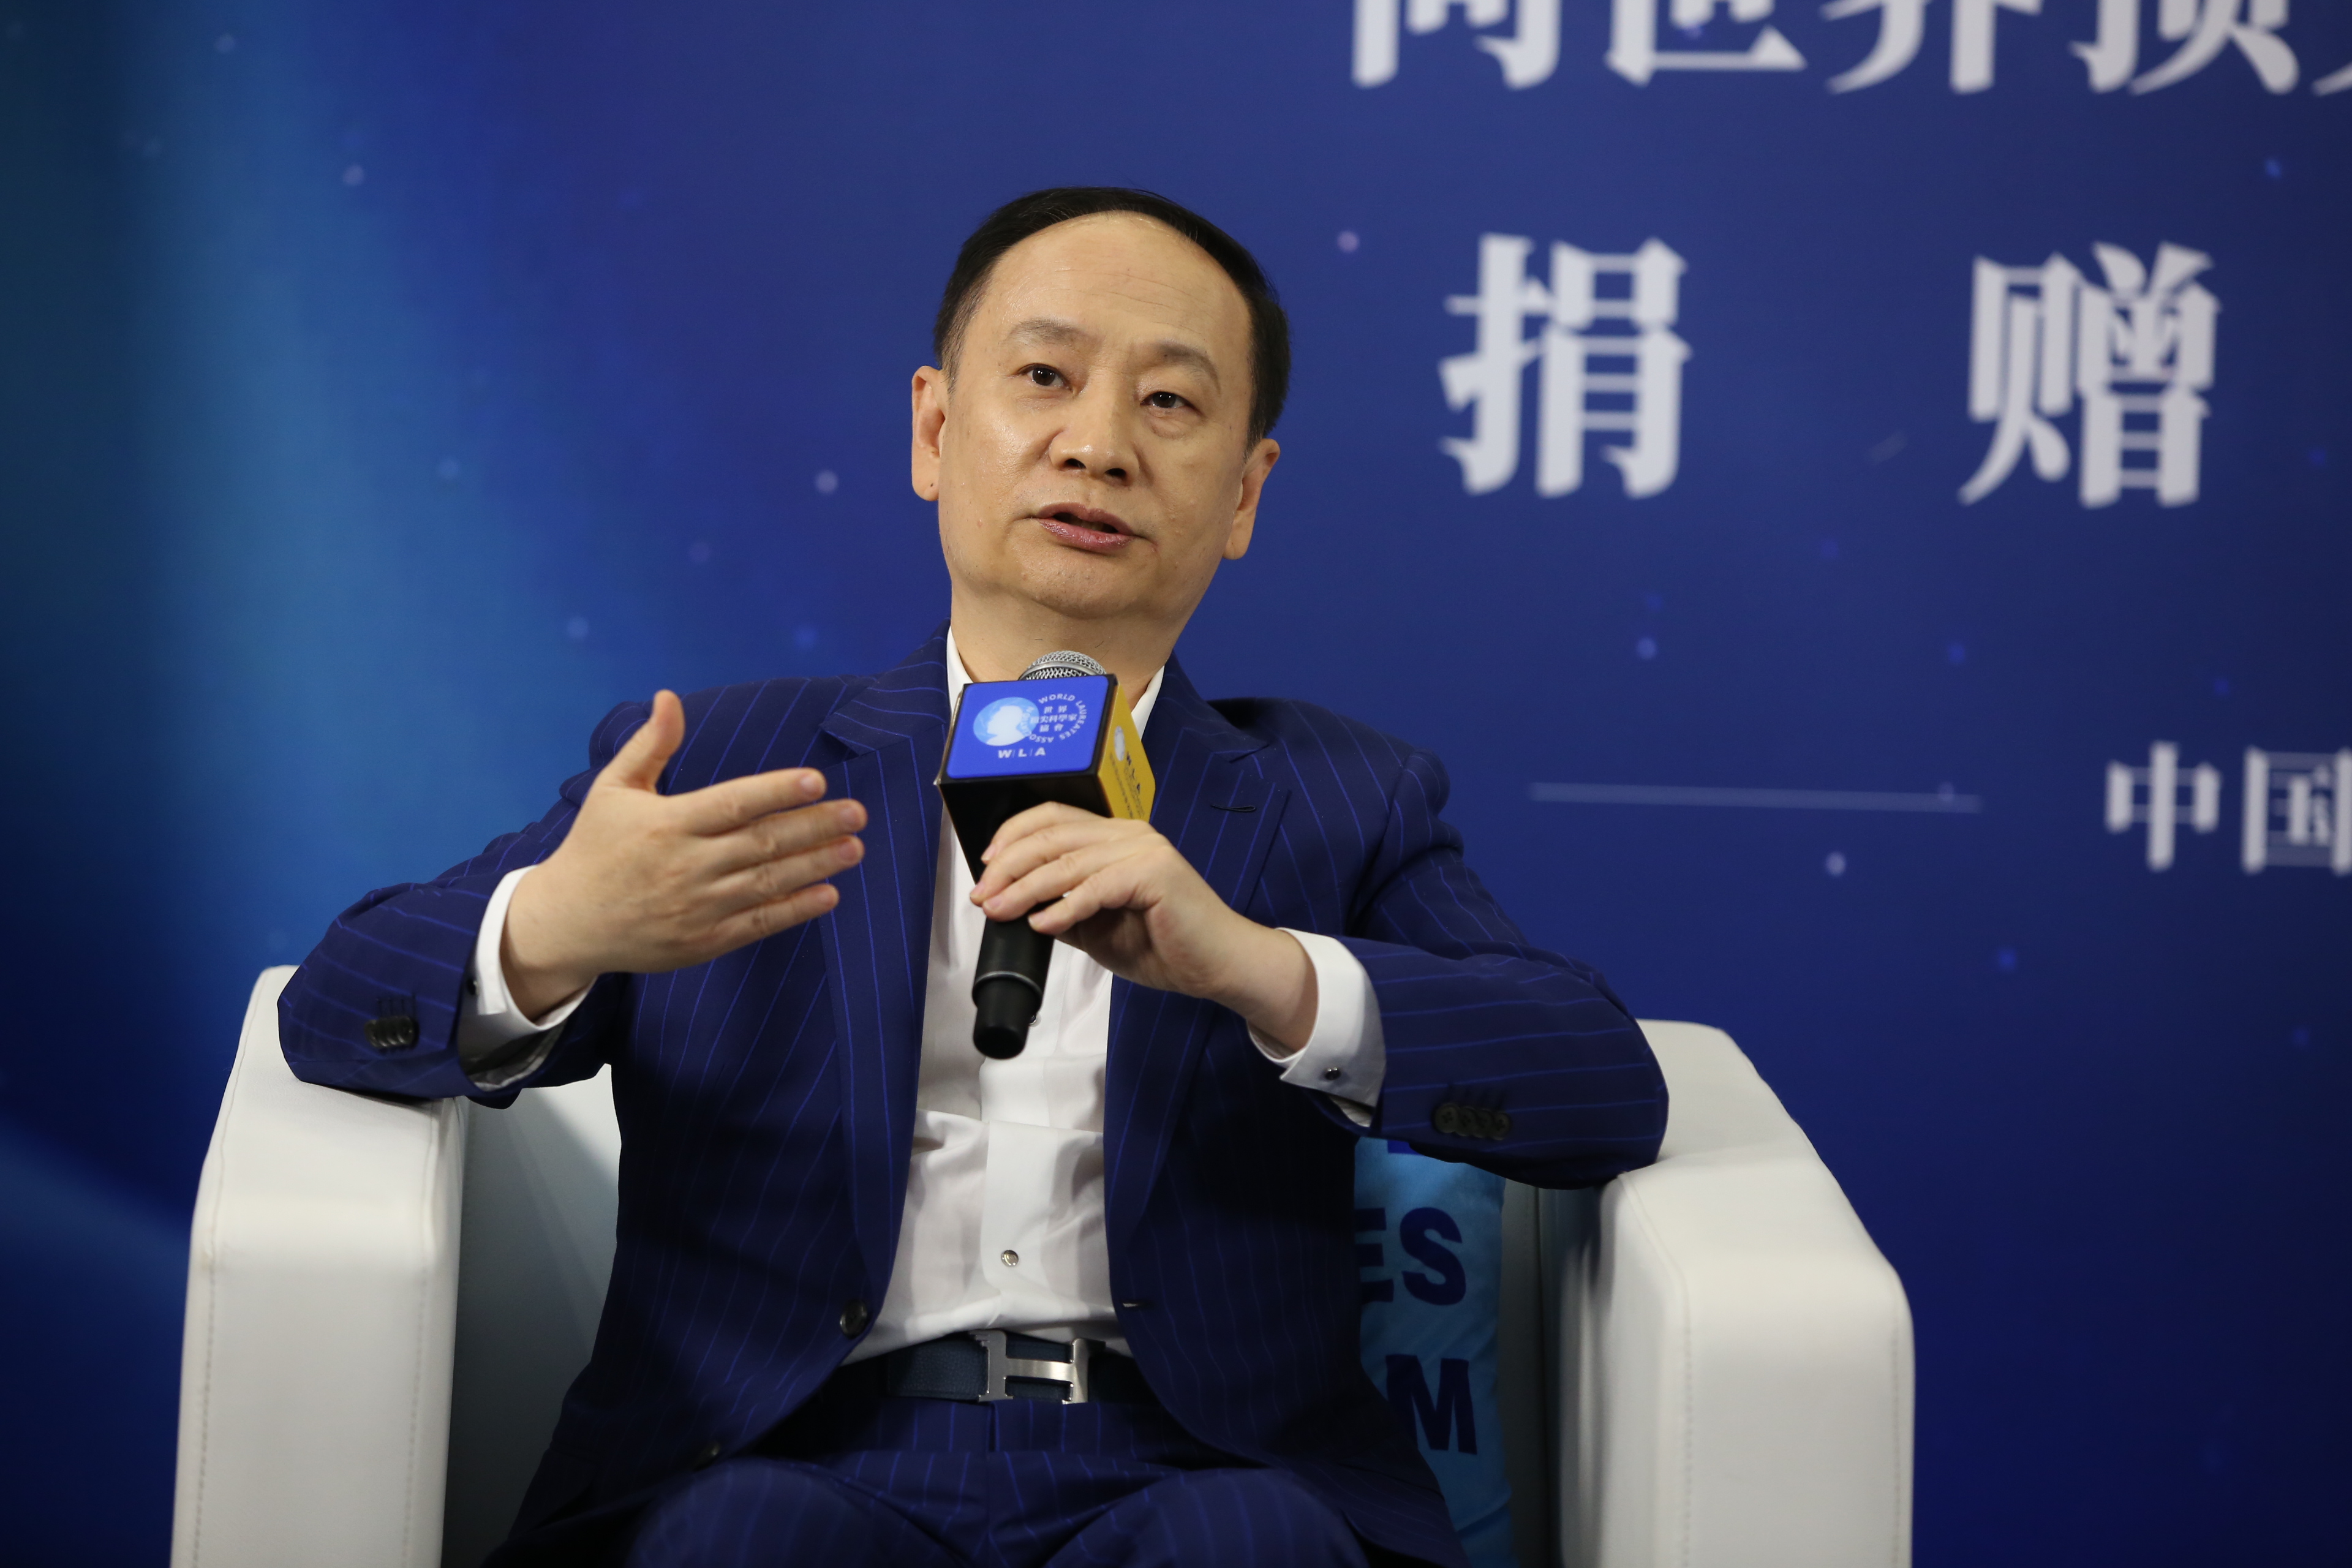 Xu Hang, co-founder and actual controller of Mindray Medical, Chairman of the Board of Shenzhen Peng Rui Group Co., Ltd., Honorary School Manager of Tsinghua University, Honorary Chairman of Shenzhen Federation of Industry and Commerce.